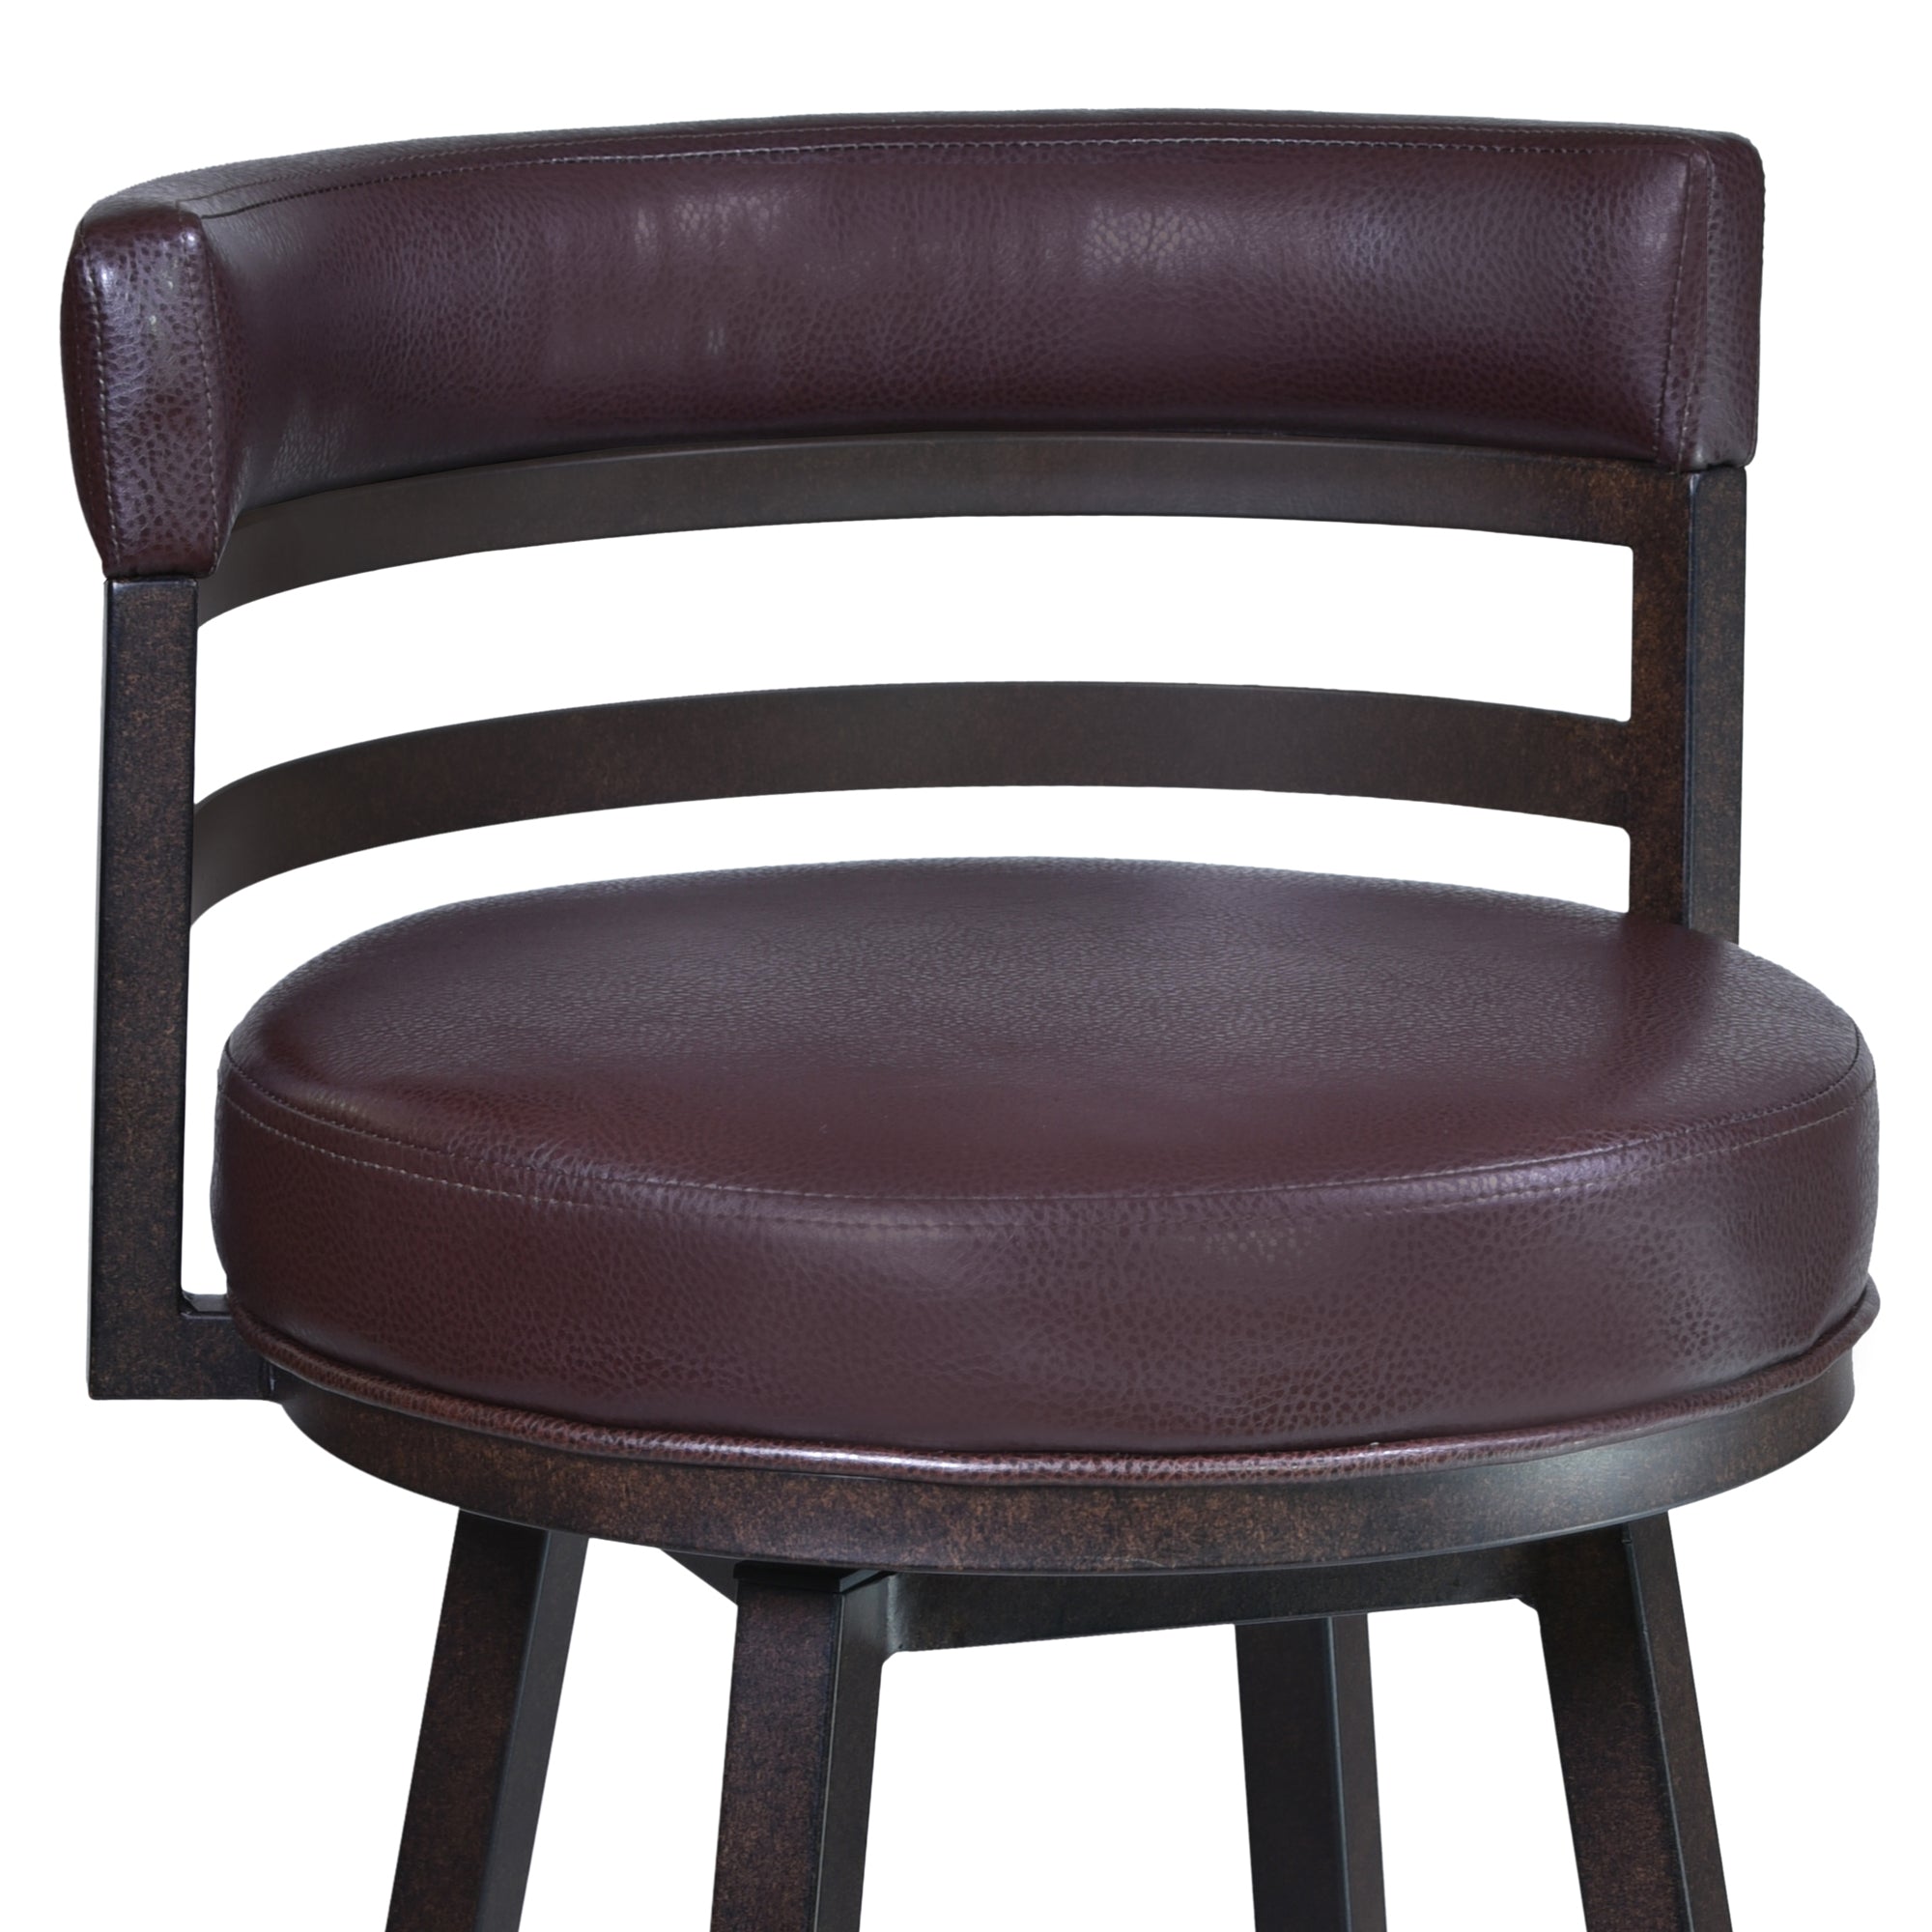 Madrid Counter Stool or Barstool in Auburn Bay finish with Brown PU upholstery